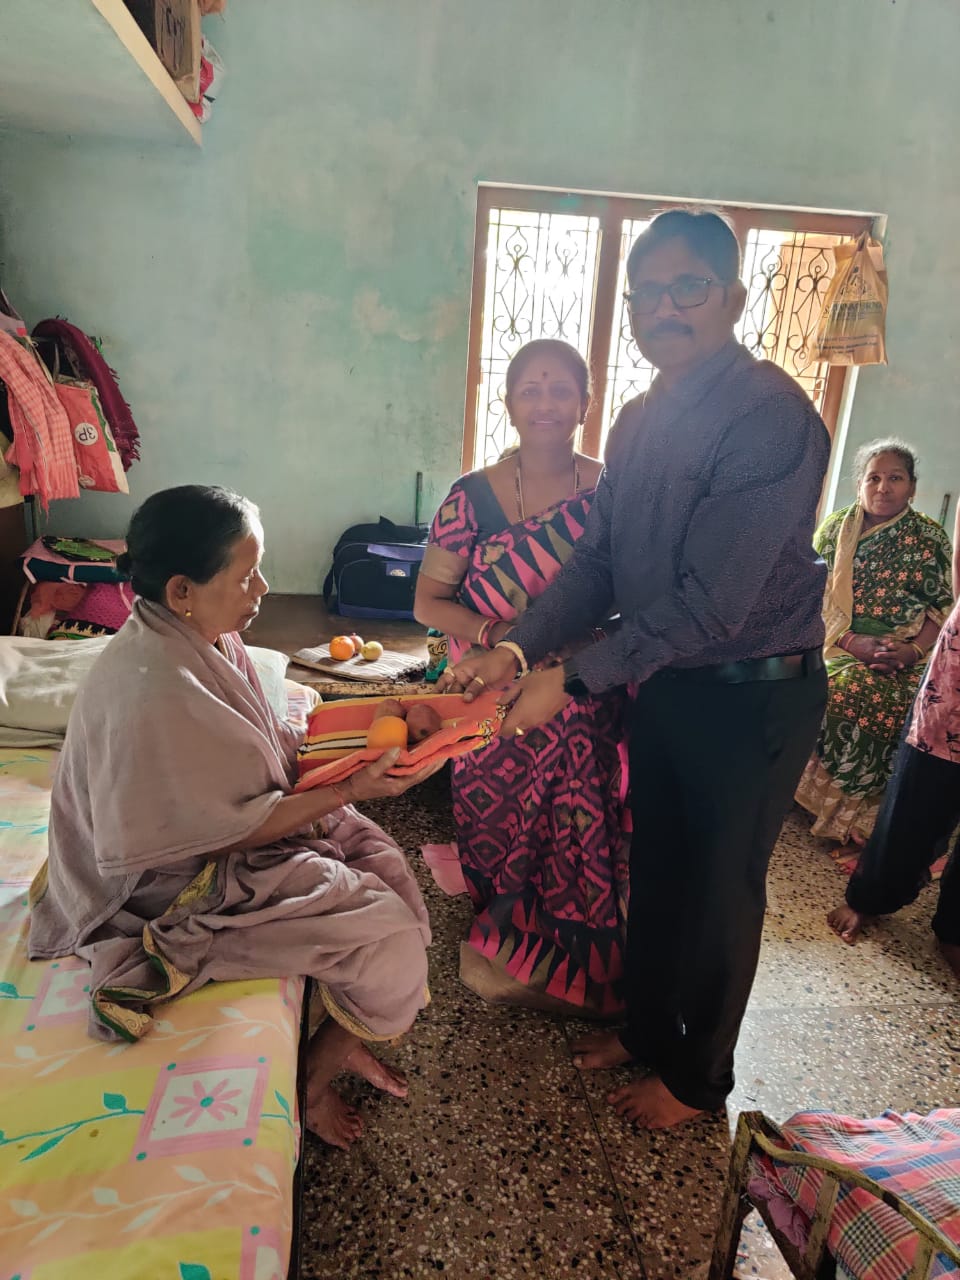 Leaders distributing blankets and fruits at an Old Age Home near Berhampur